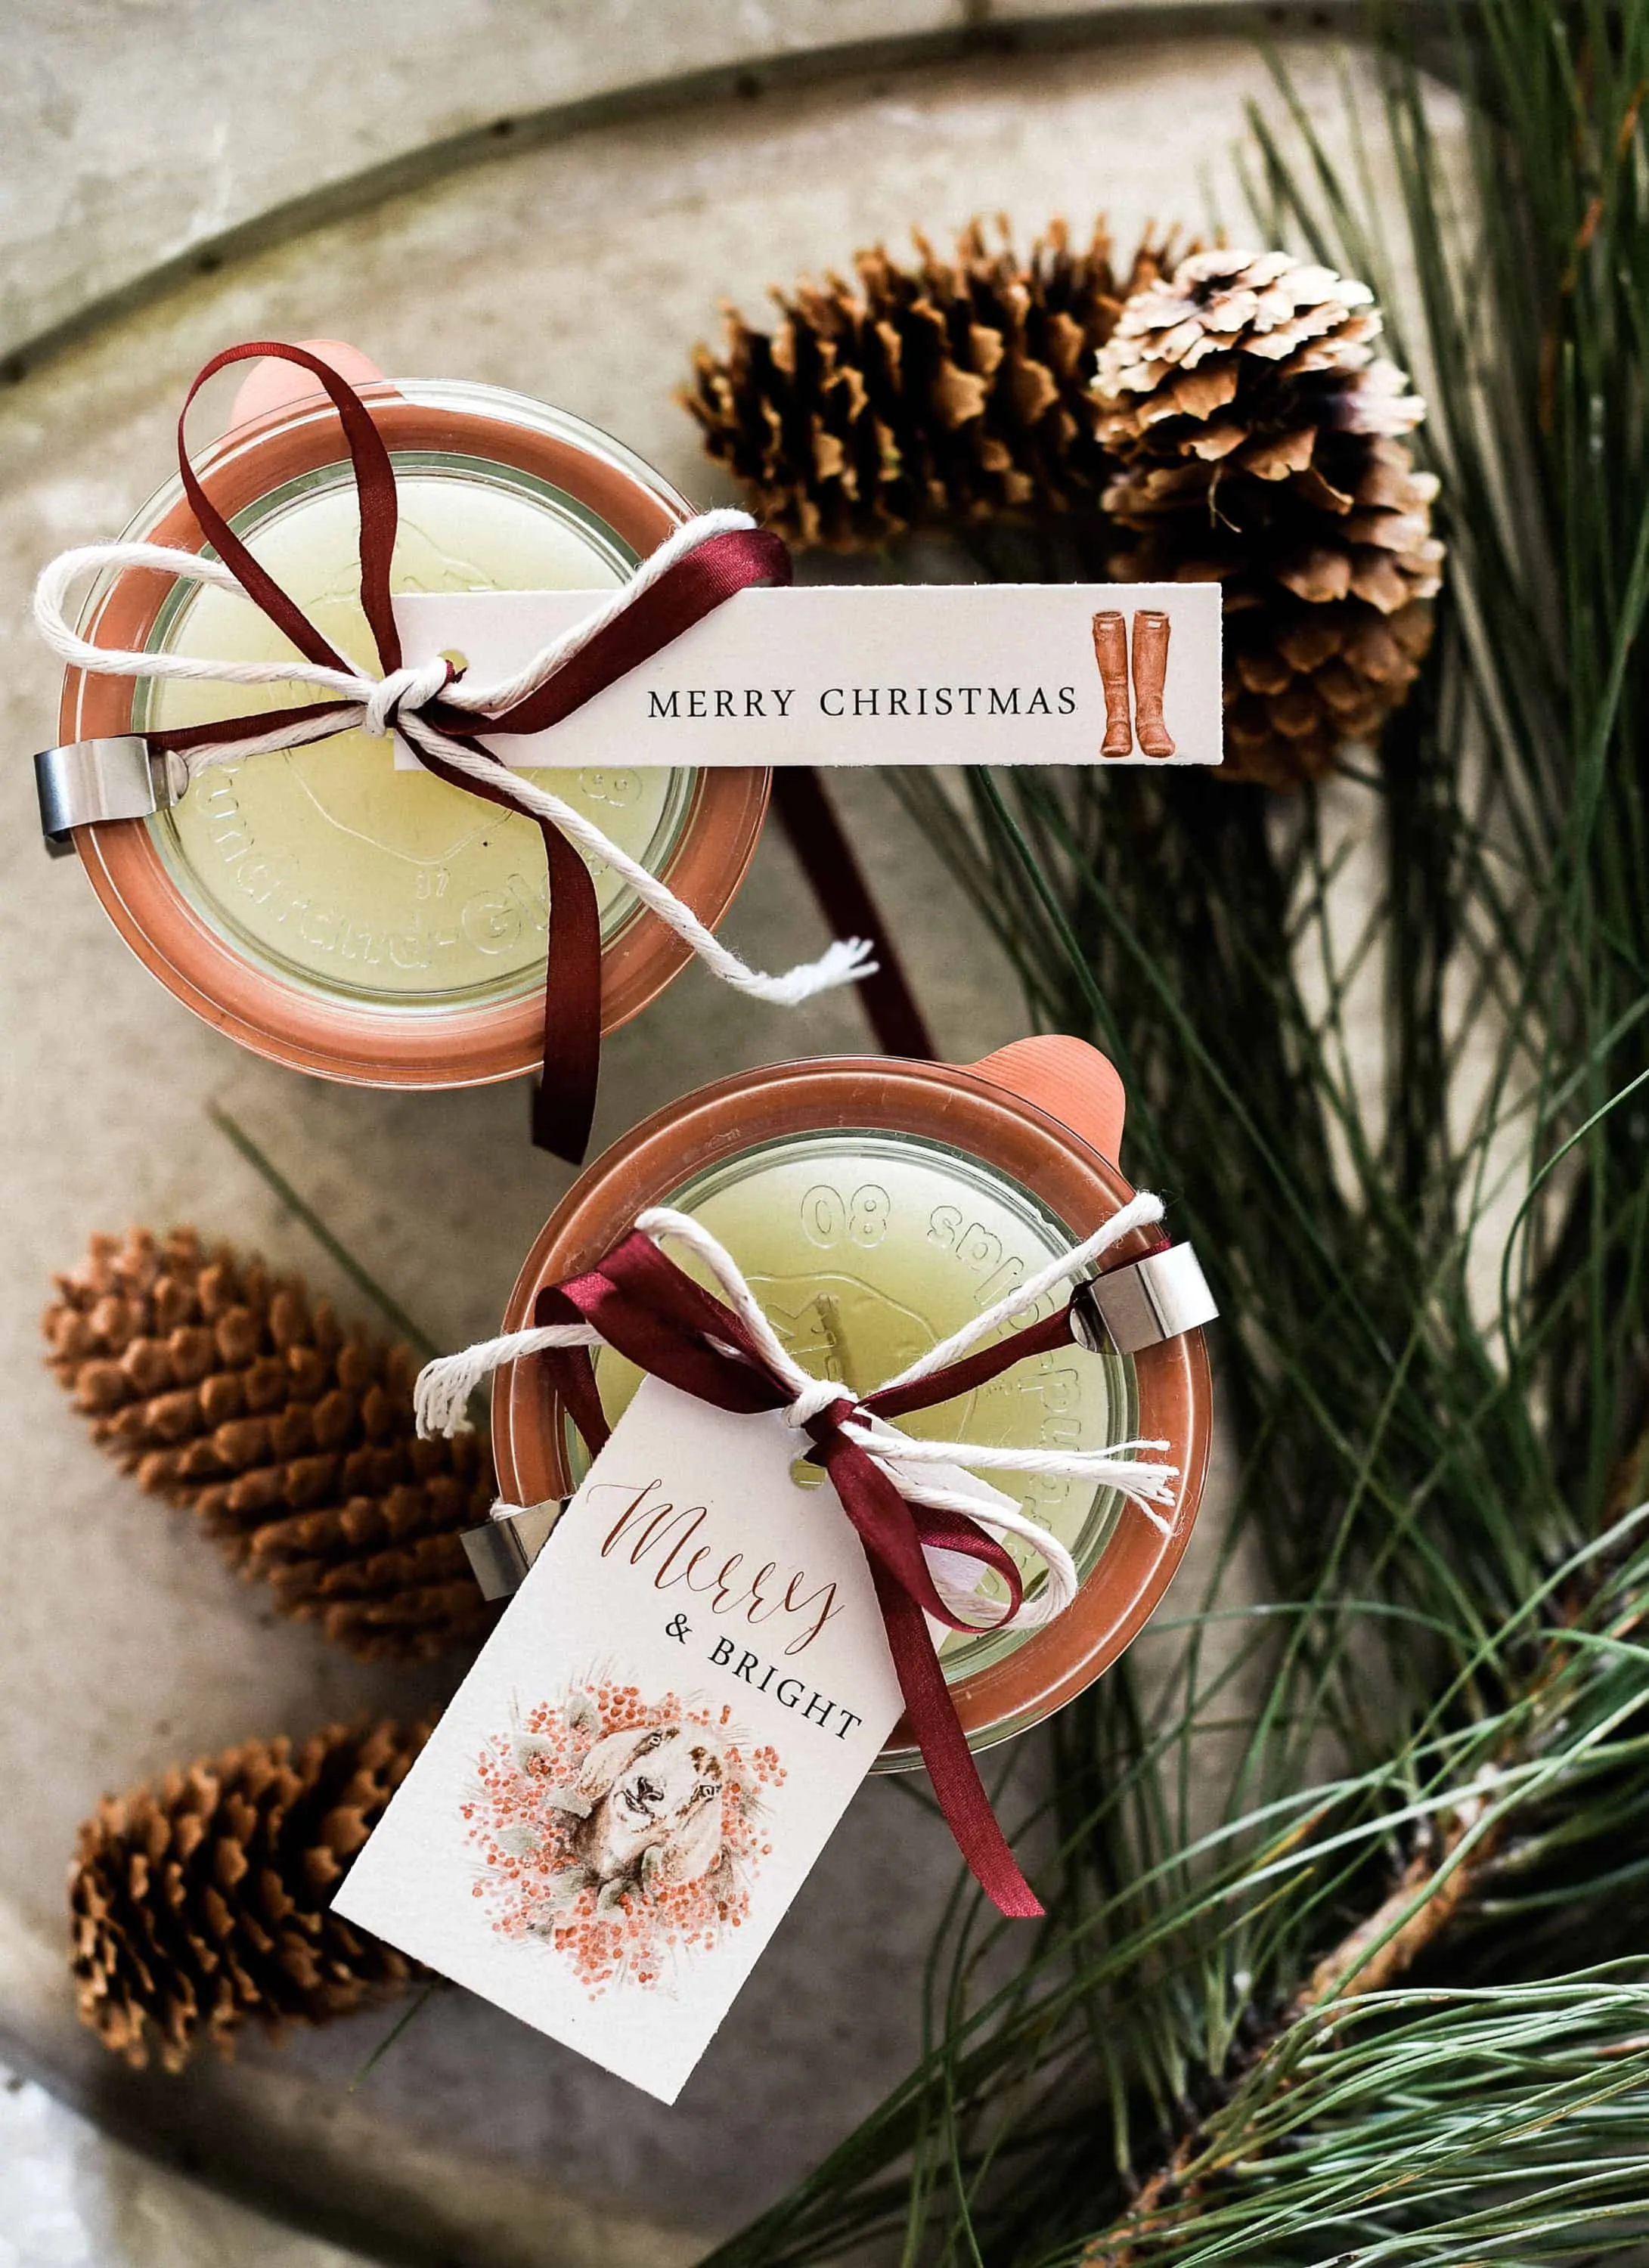 Need a handmade Christmas gift idea? You won’t believe how easy it is to make all-natural homemade candles! 